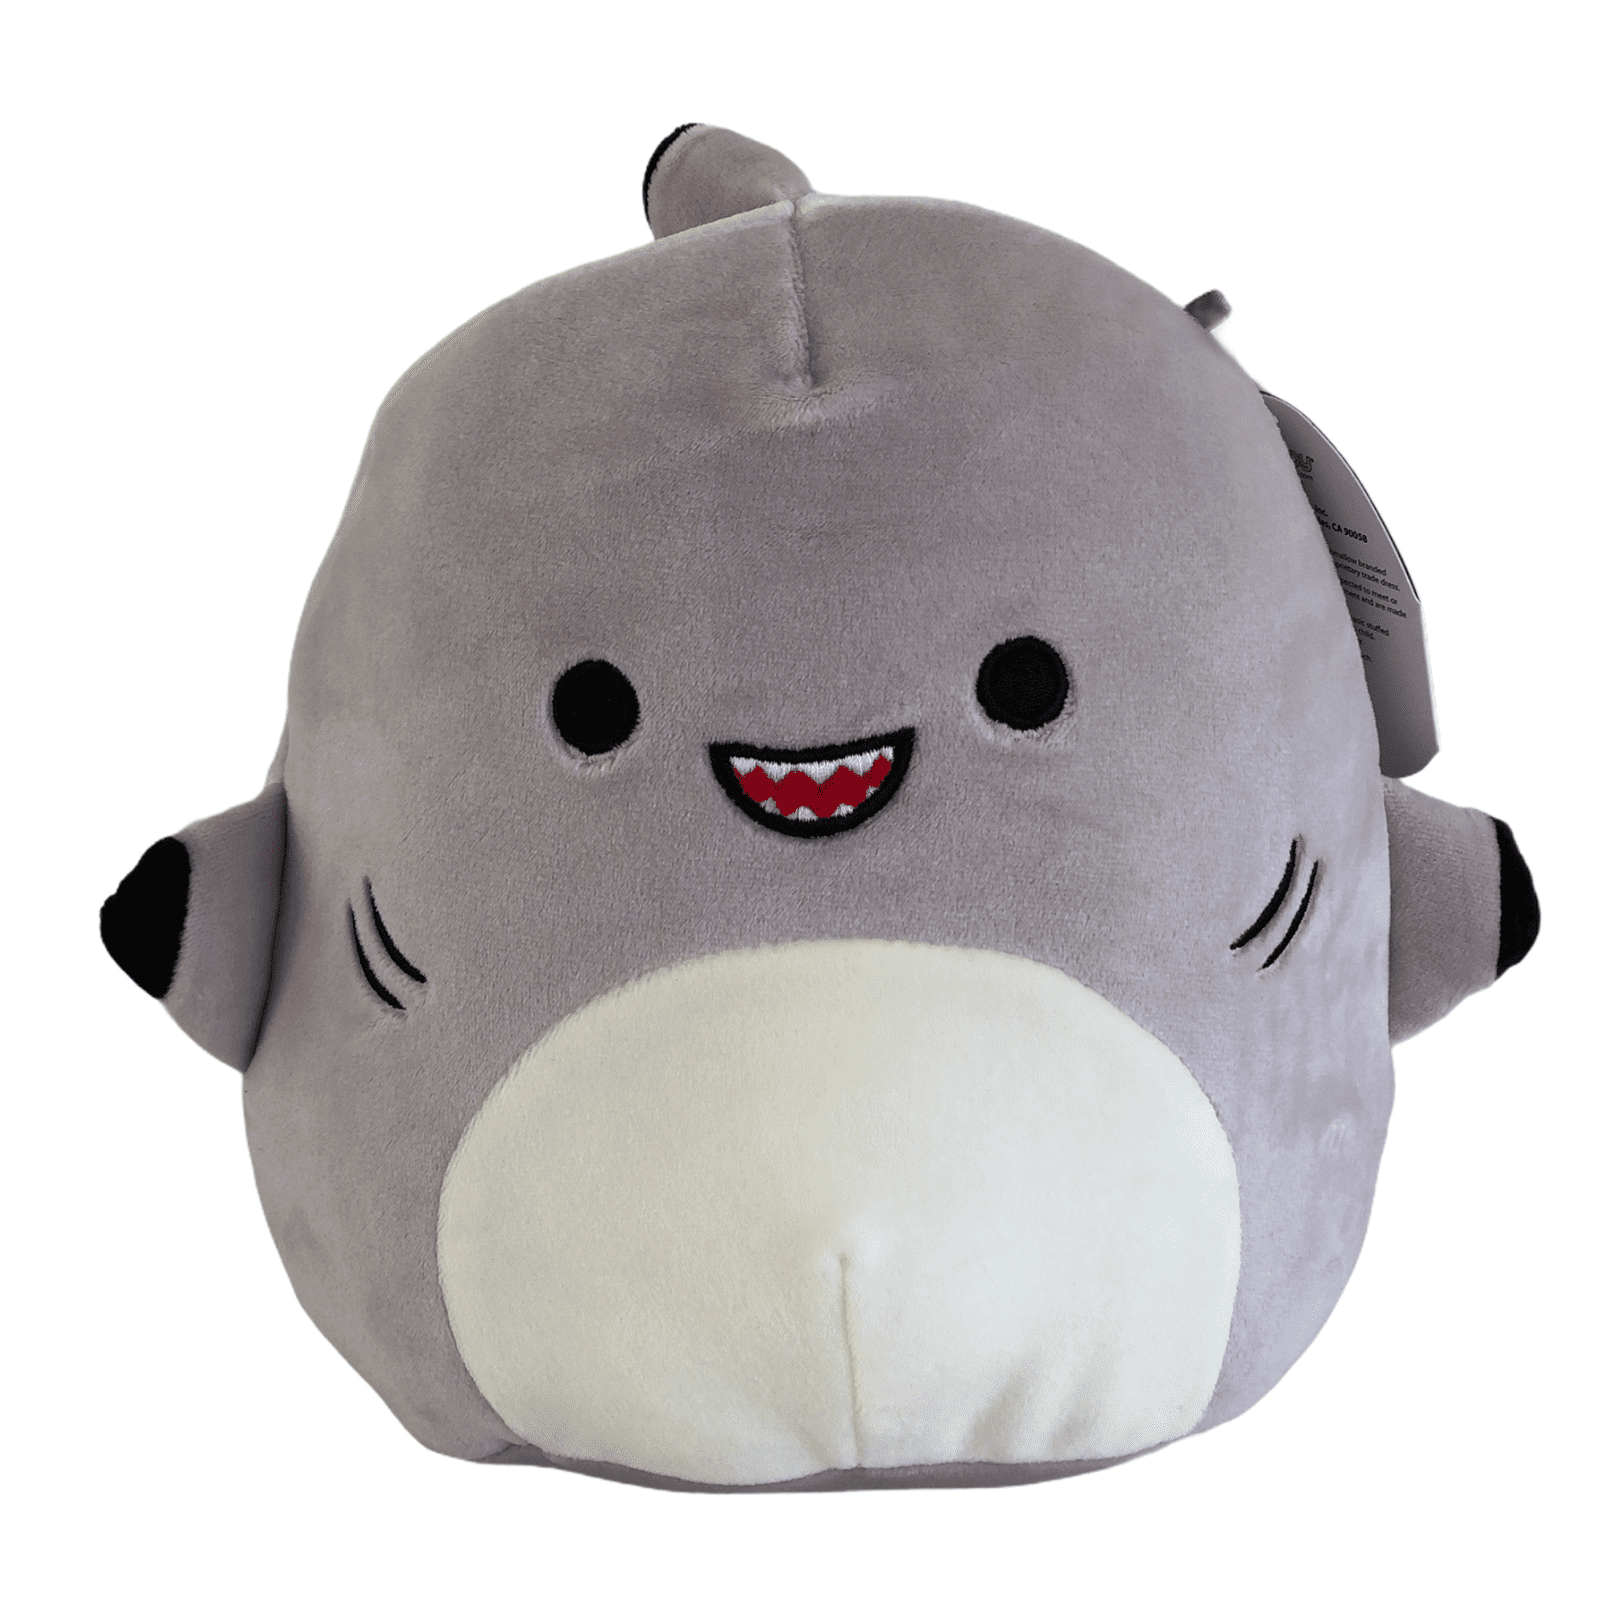 Details about   Austin Avocado 16 inch Squishmallow Plush Target Exclusive NEW FREE FAST SHIP 